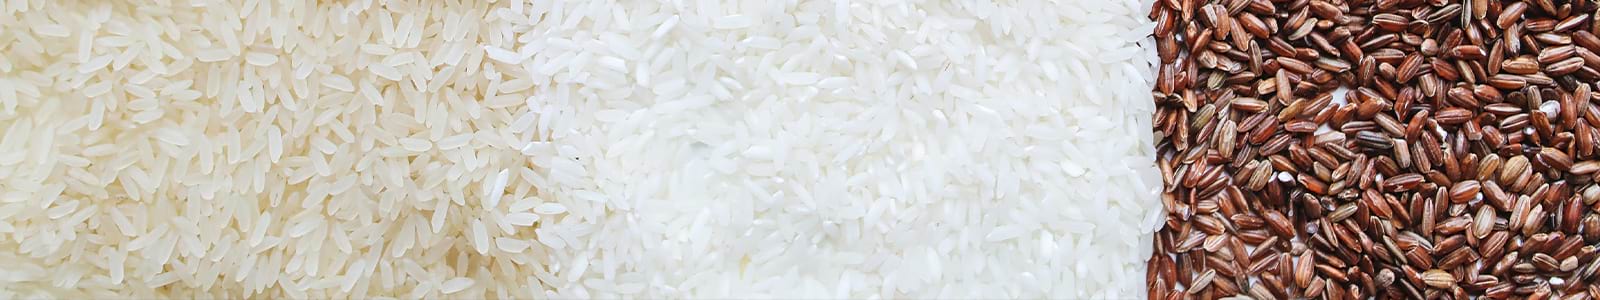 Rice store - buy rice online from the health food store in the USA - Alive Herbals